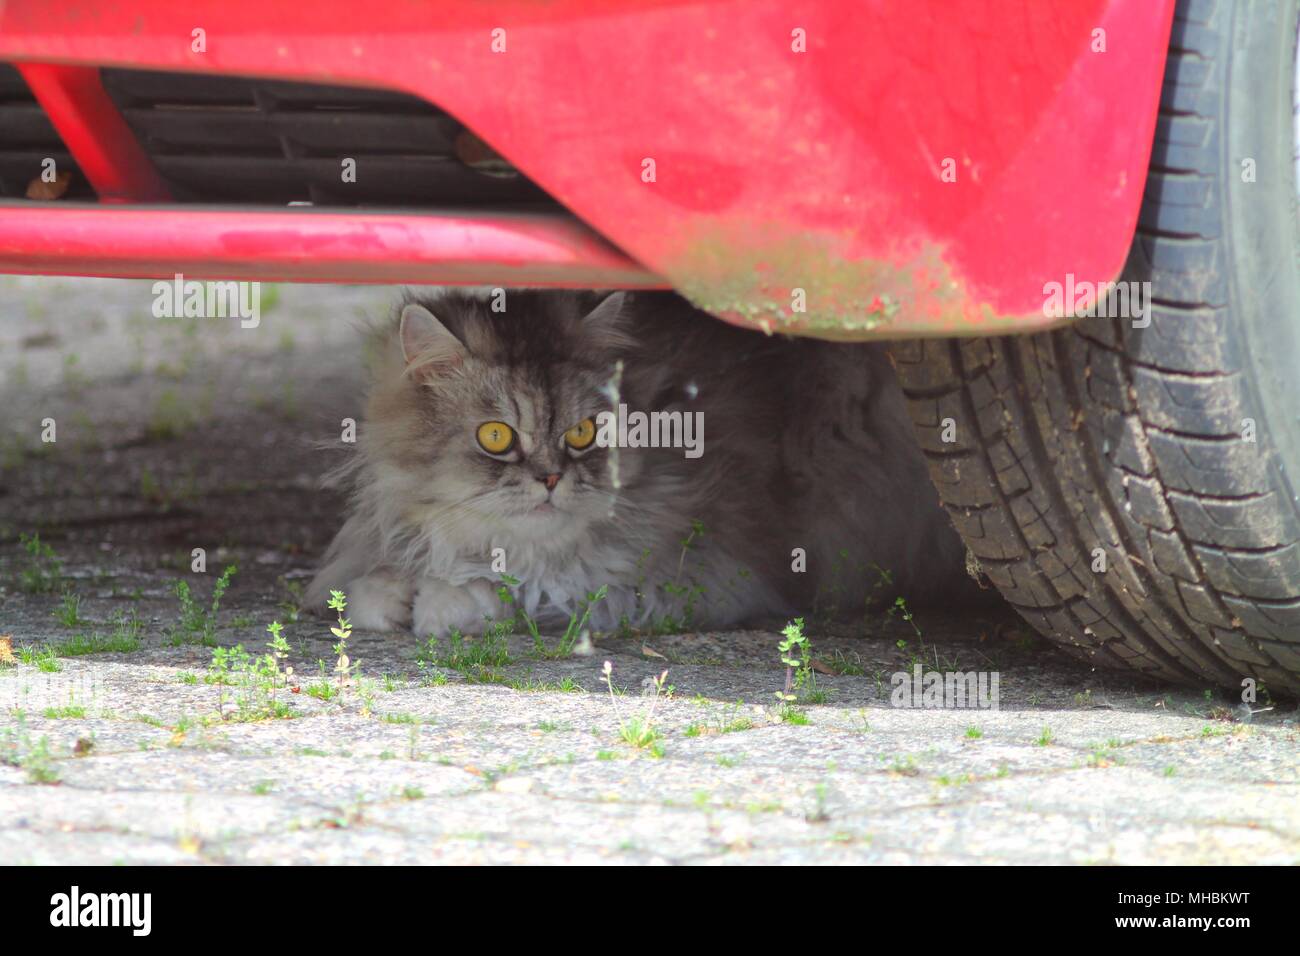 Fluffy grey cat with yellow eyes hidding under car. Stock Photo